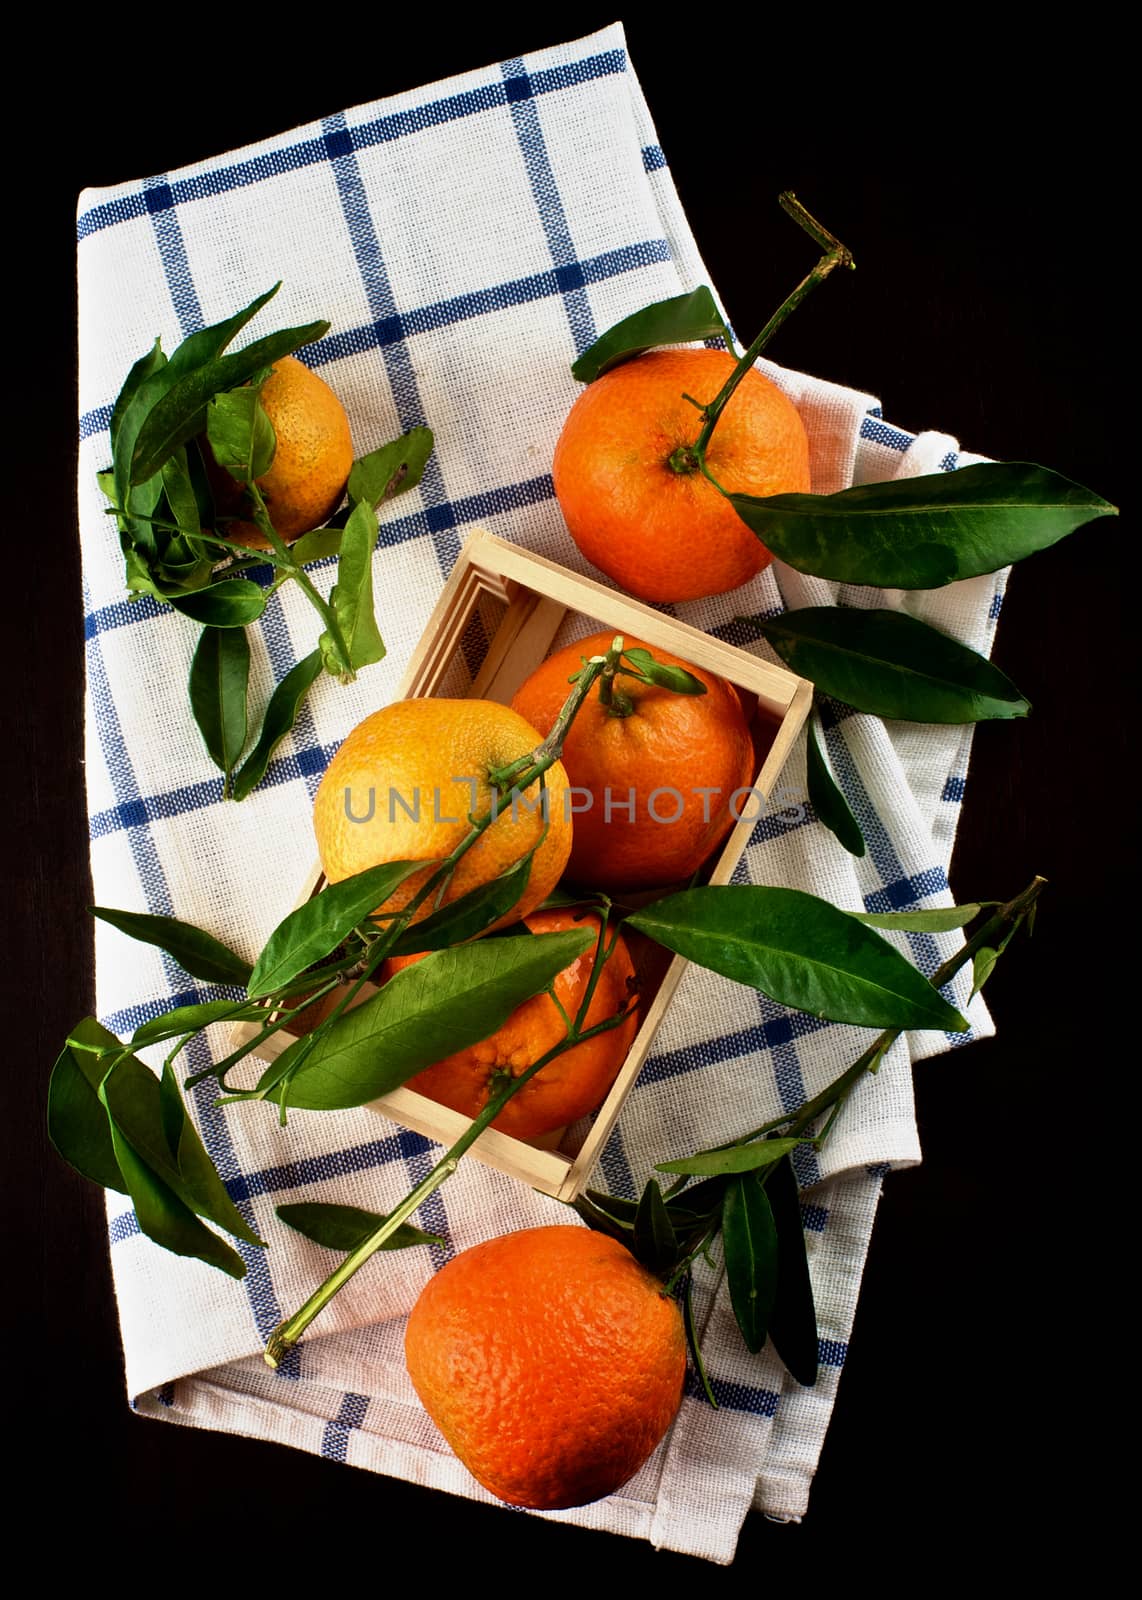 Ripe Tangerines with Leafs in Wooden Box on Napkin closeup on Dark Wooden background. Top View